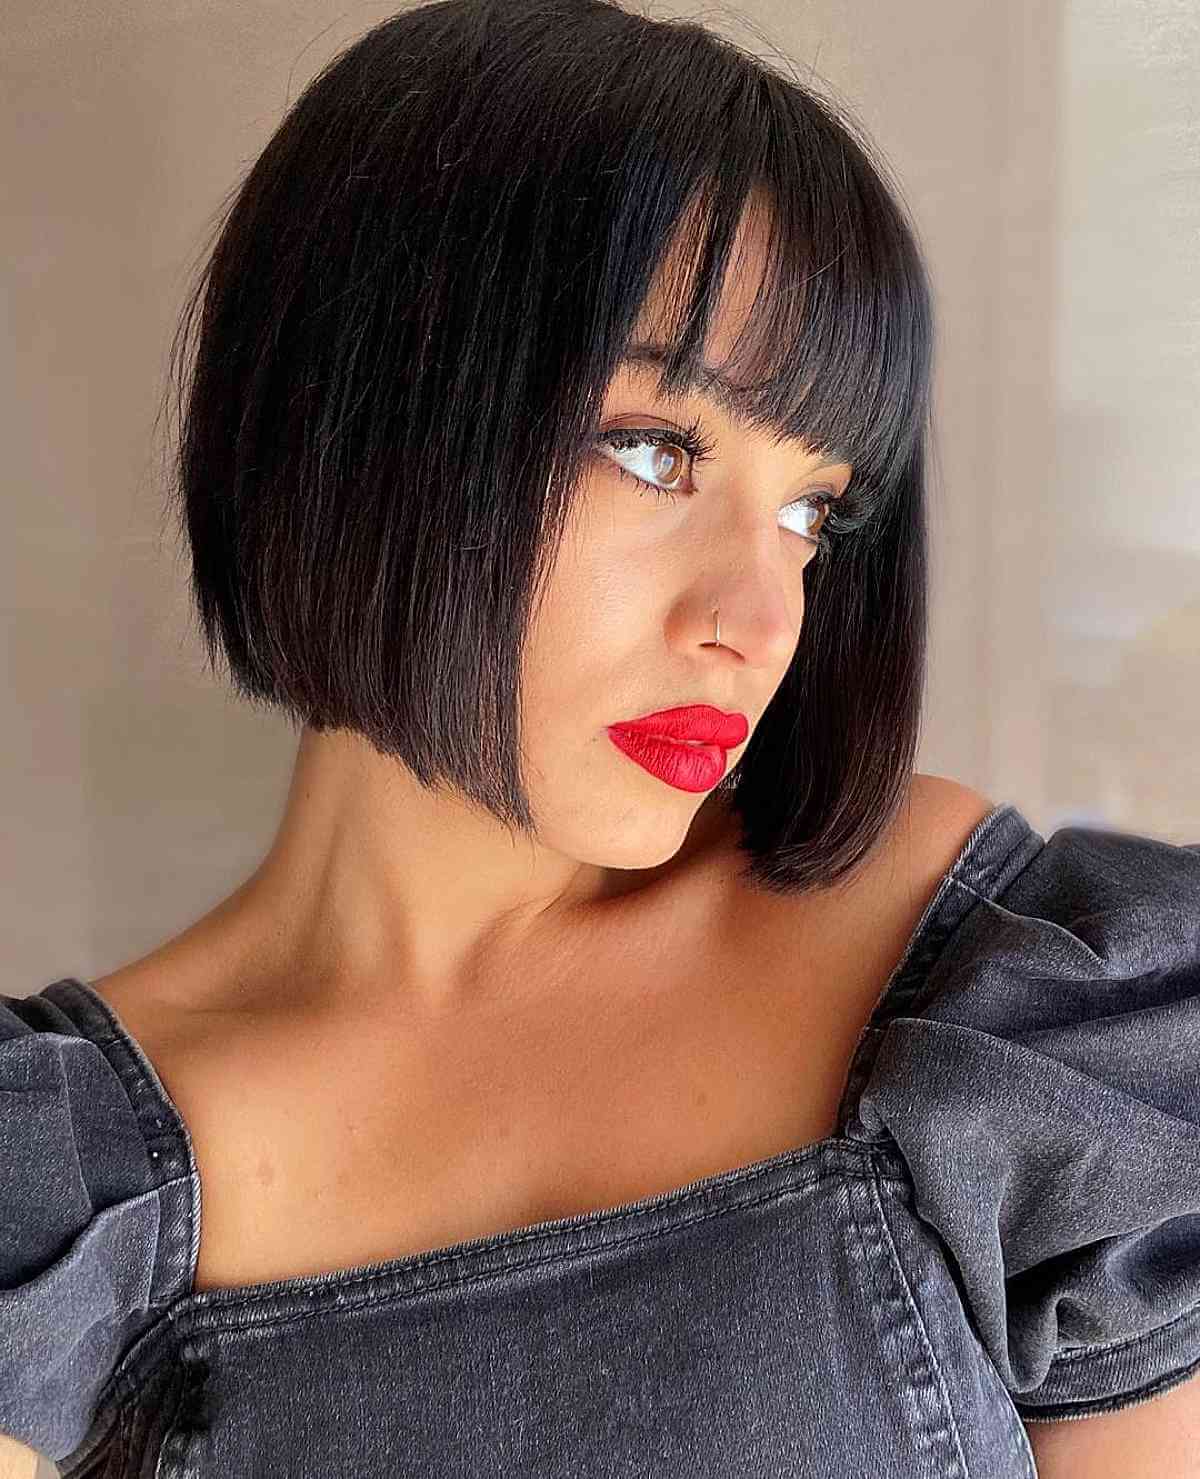 28 Remarkable Chin-Length Bob with Bangs to Consider for Your Next Cut